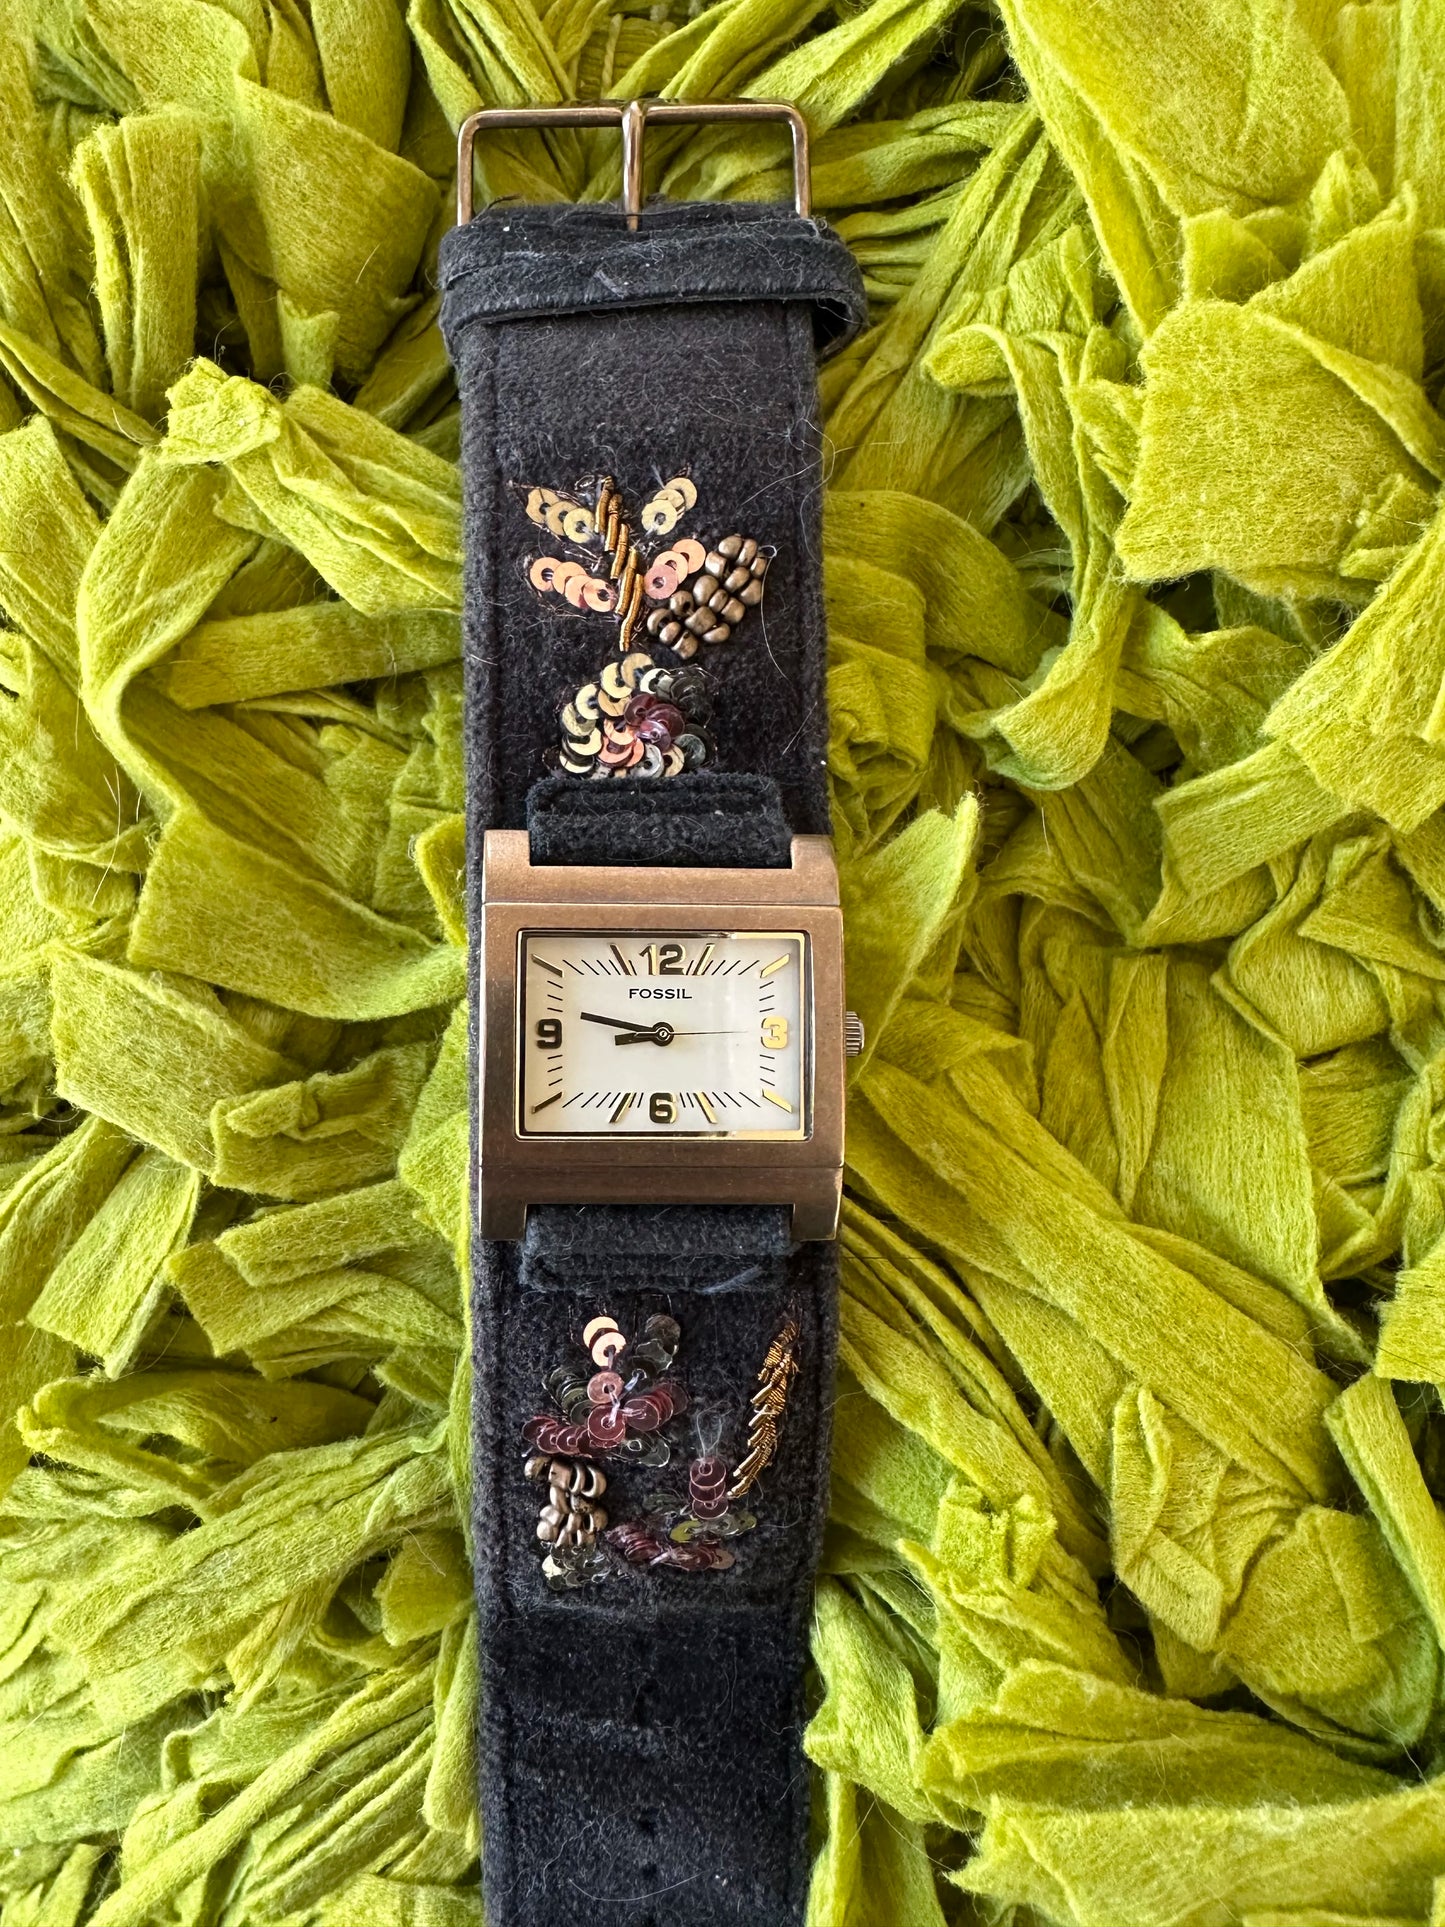 Fossil Watch - Dark green velour with embellished beads.